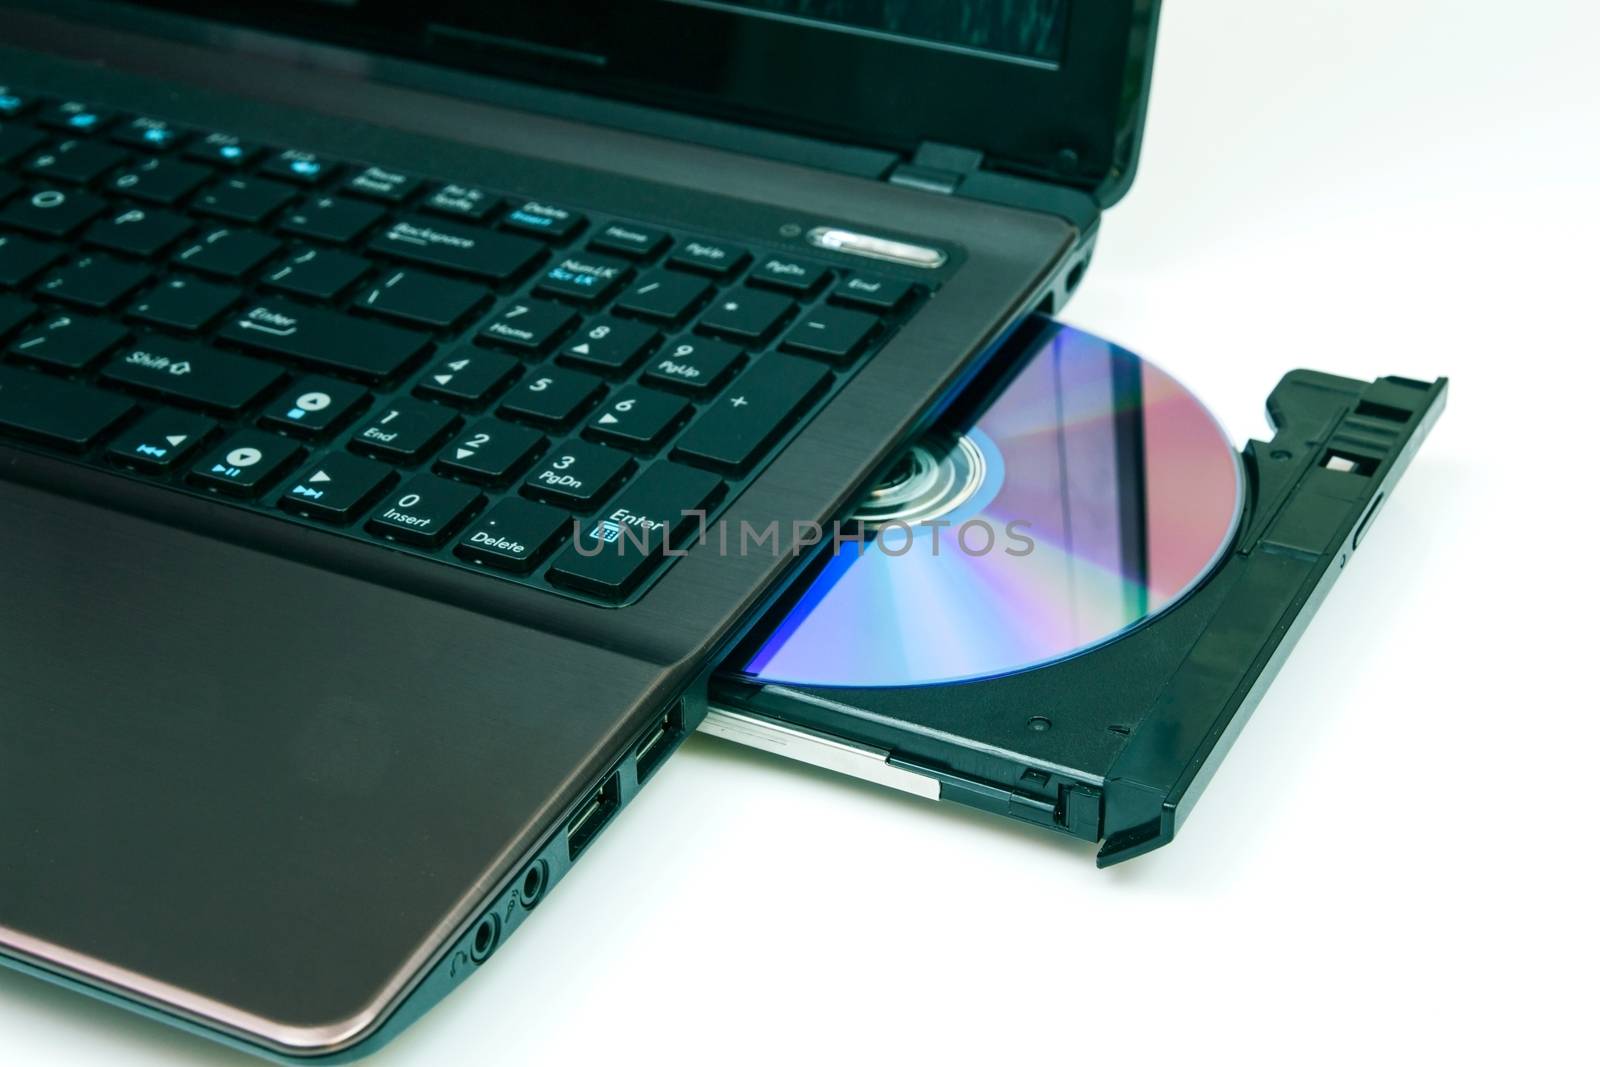 Laptop with open CD or DVD-ROM  by simpson33